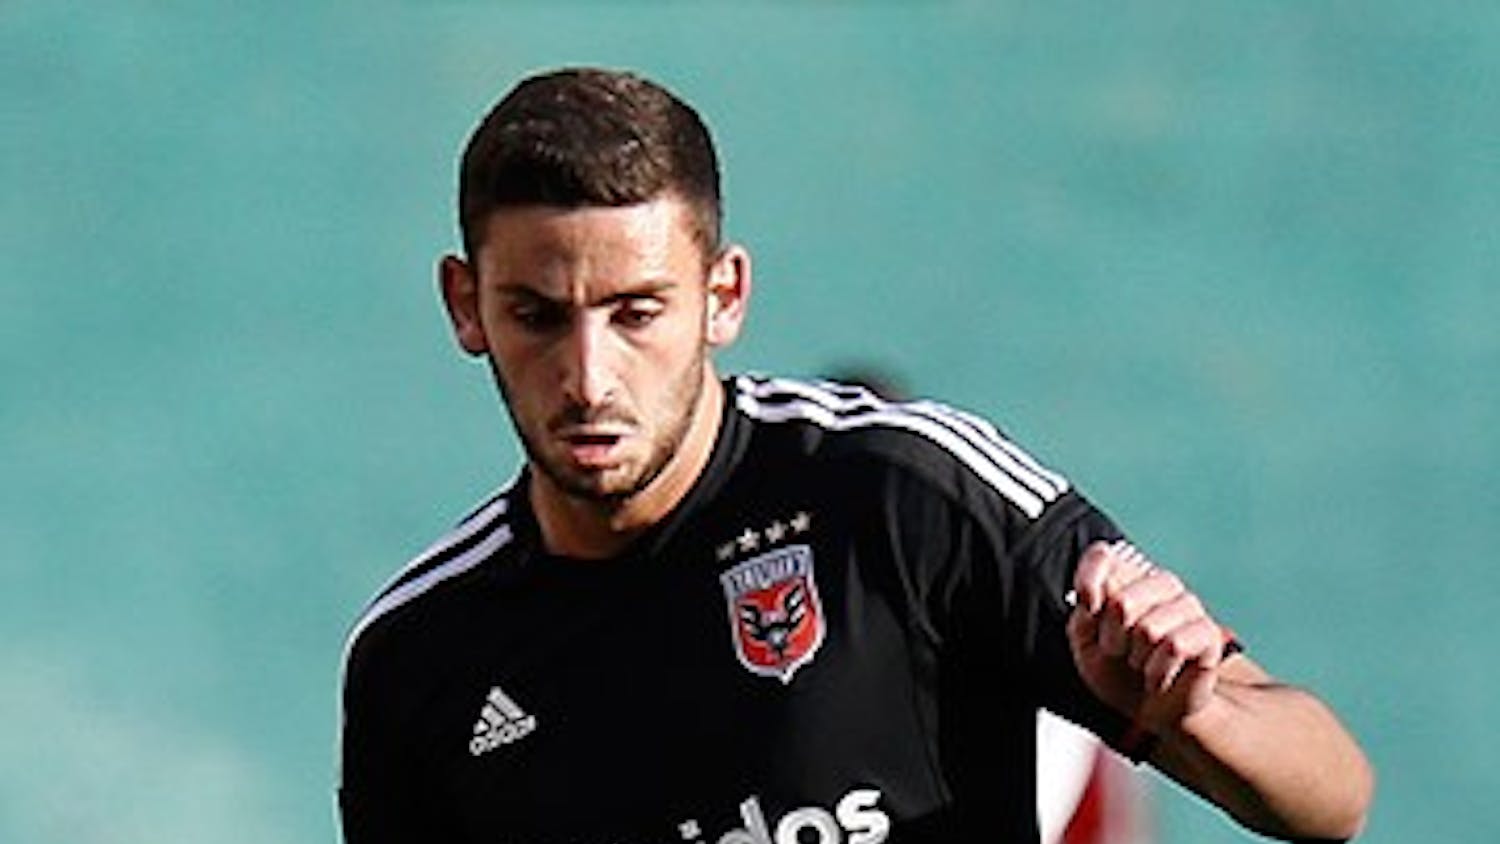 D.C. United defender Steve Birnbaum&nbsp;figures to play a role in the U.S Men's National Team back line this summer at the Copa America Centenario